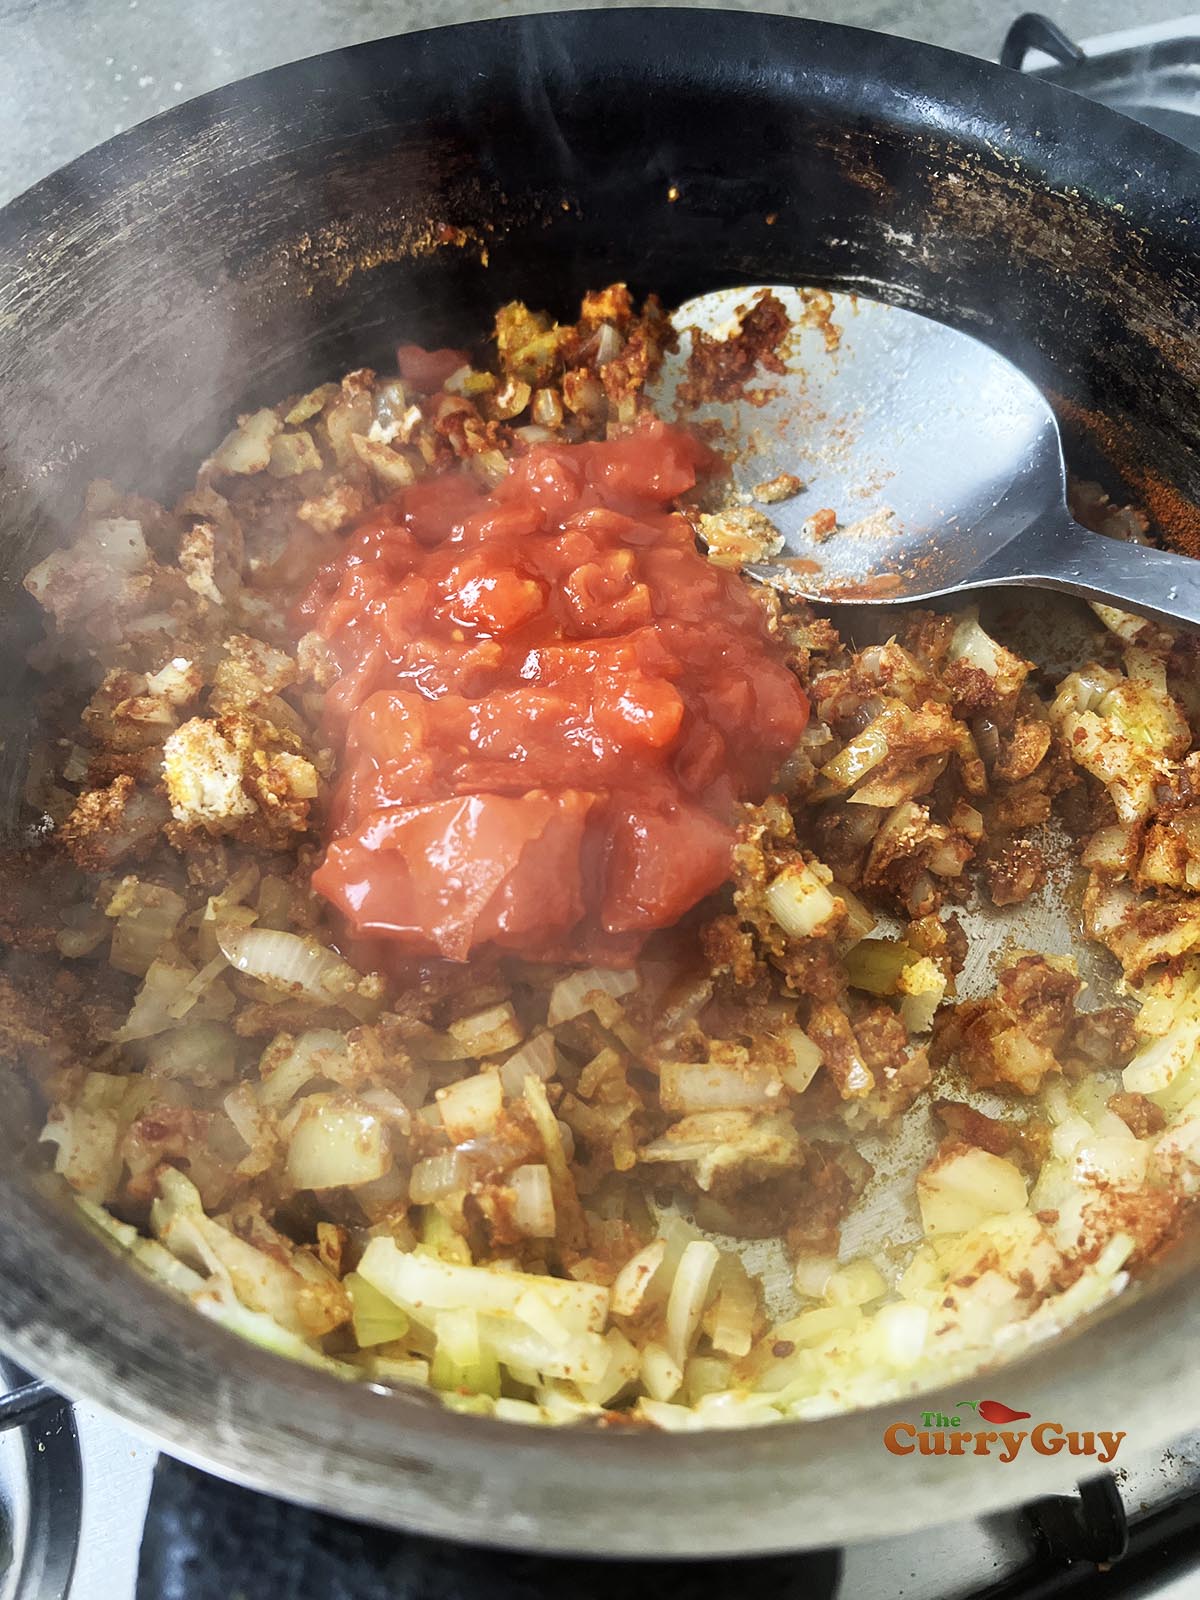 Adding spices and tomatoes to the frying pan